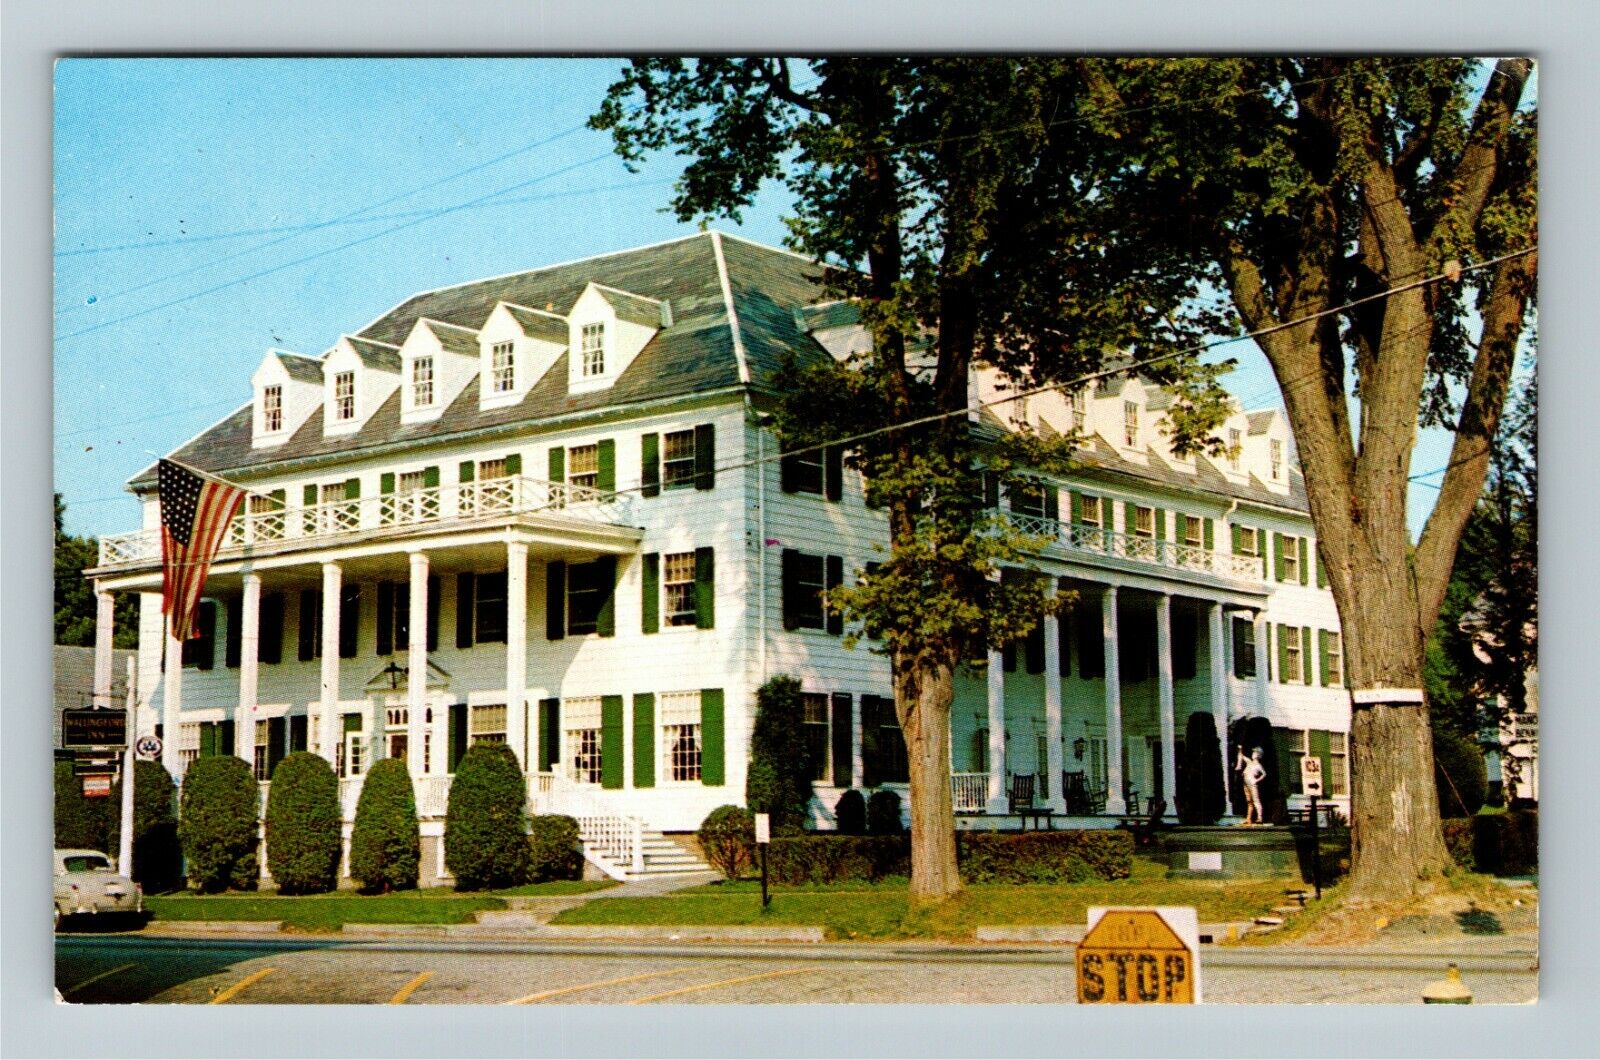 Wallingford VT-Vermont, Wallingford Inn, Stop and Stay, Flag, Vintage Postcard